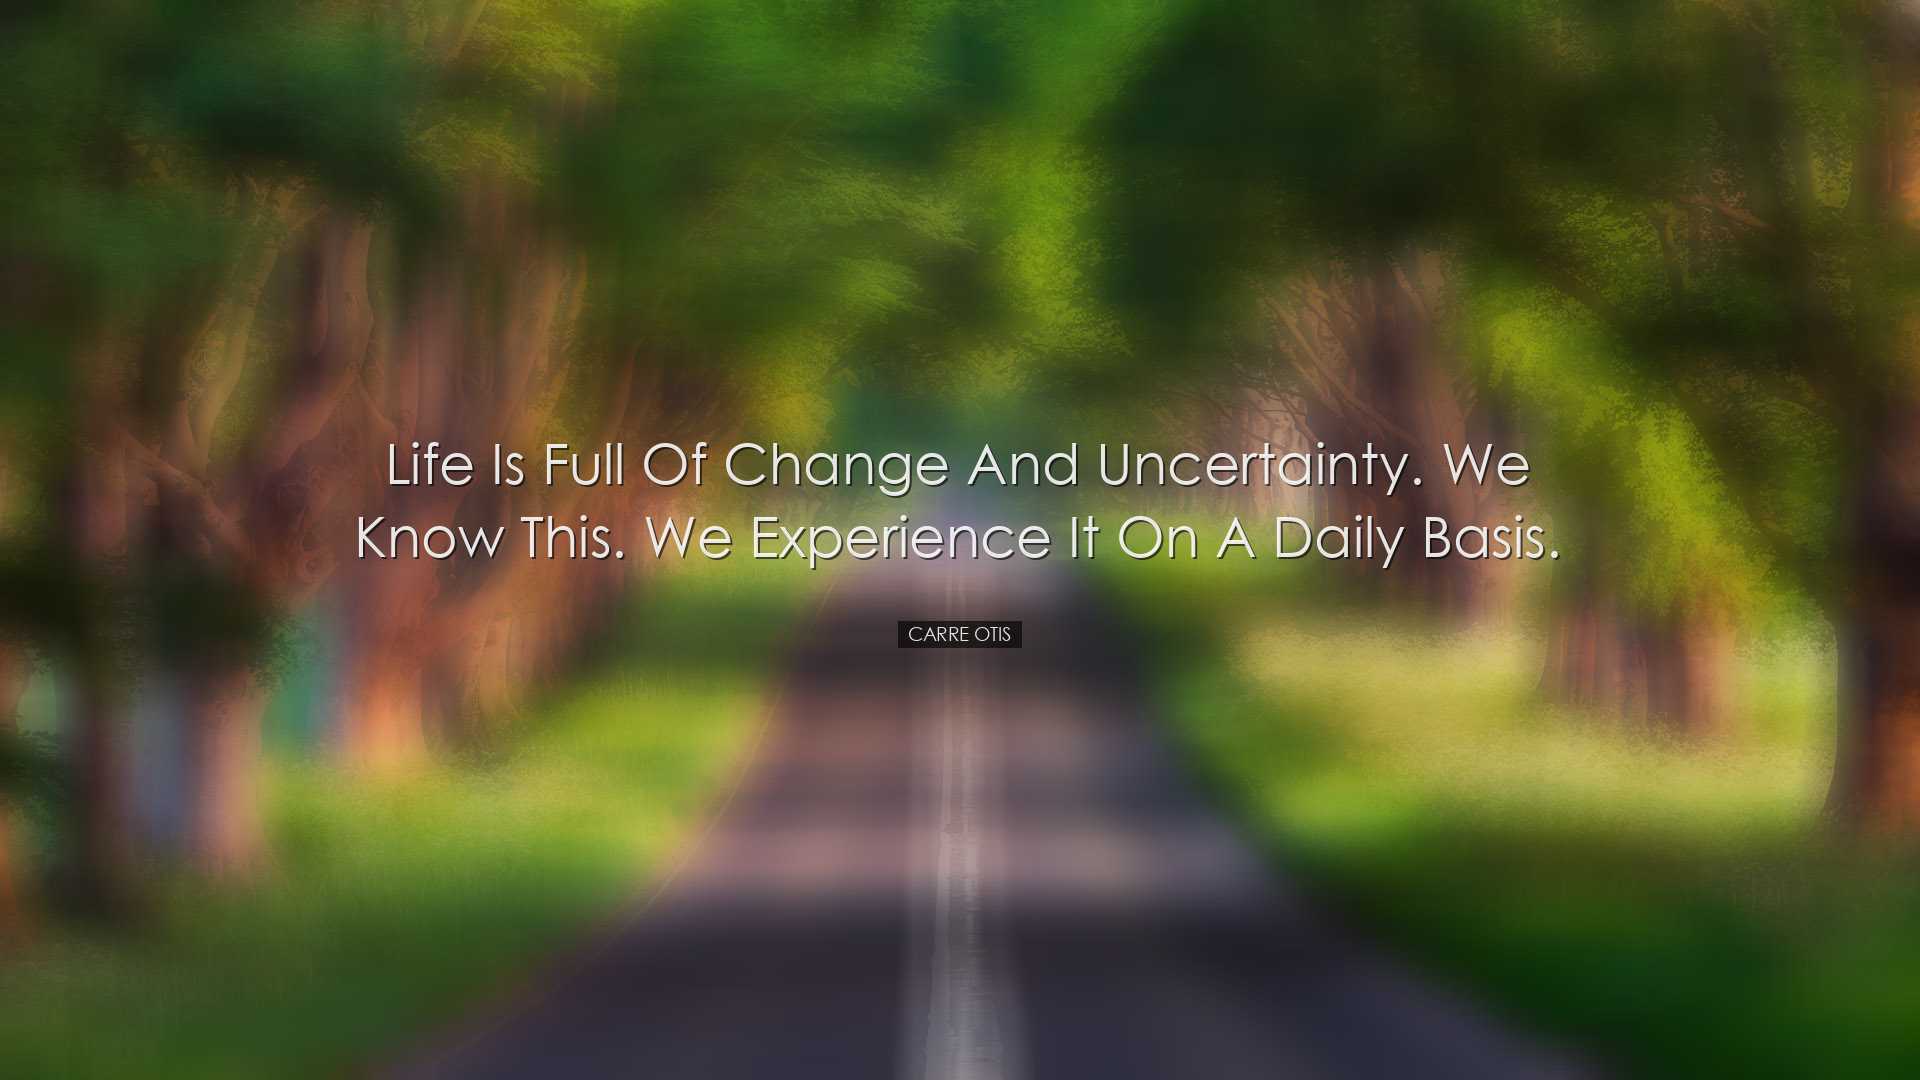 Life is full of change and uncertainty. We know this. We experienc